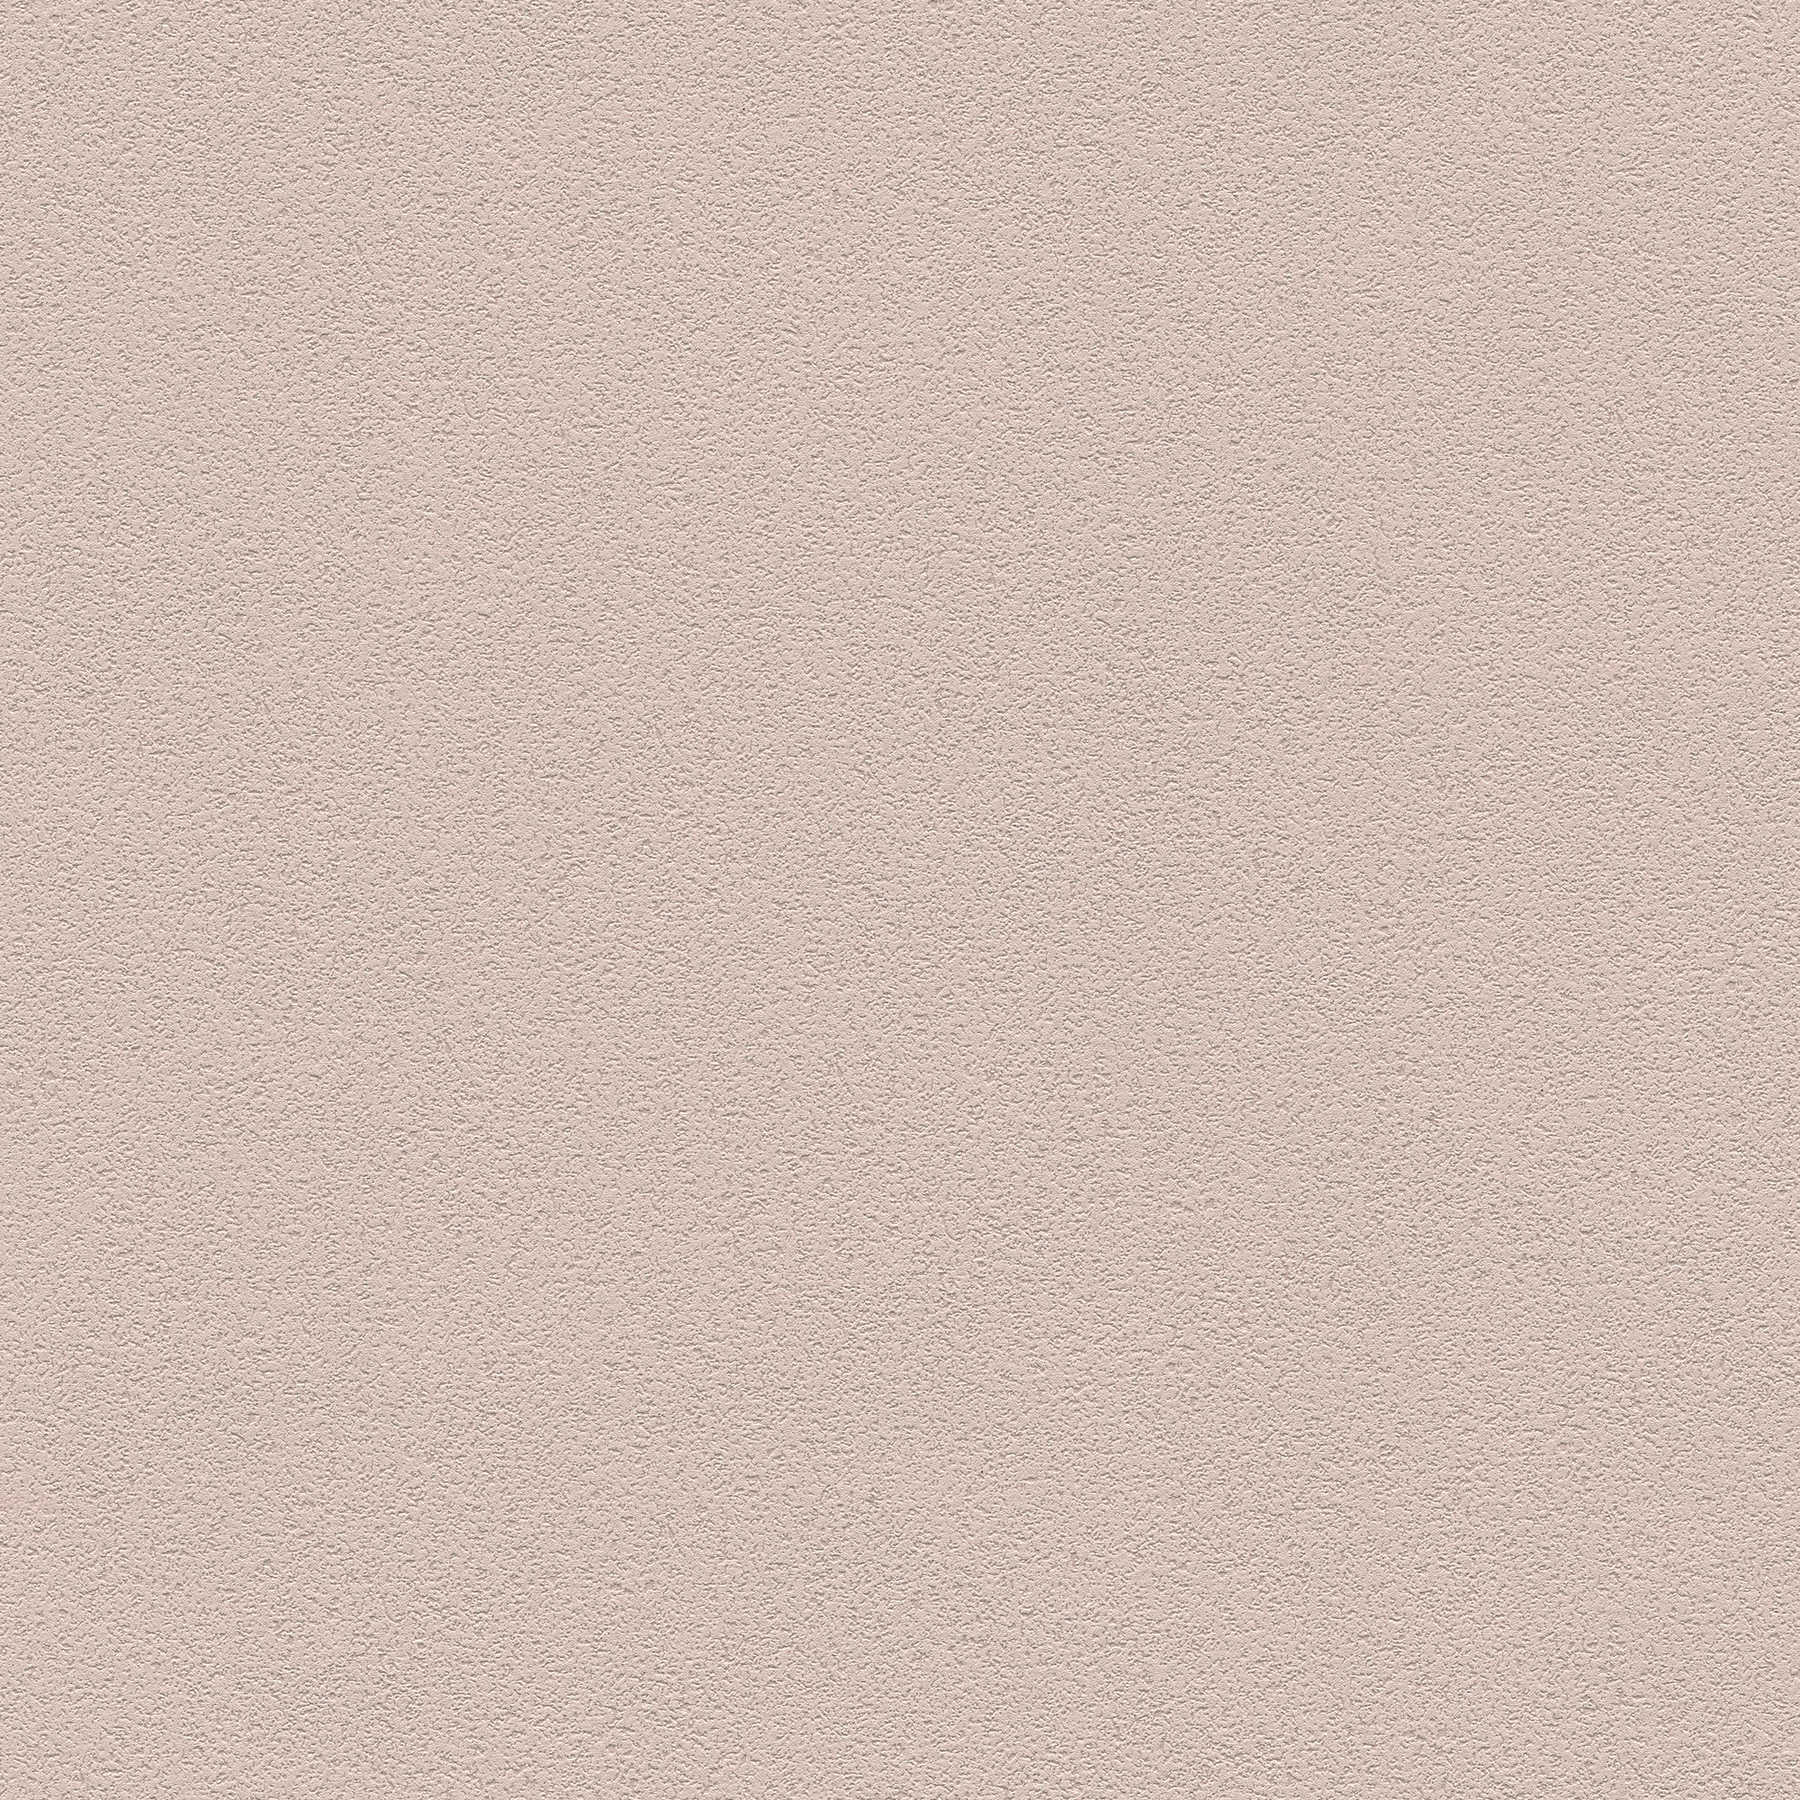 Plain wallpaper with fine surface texture - brown
